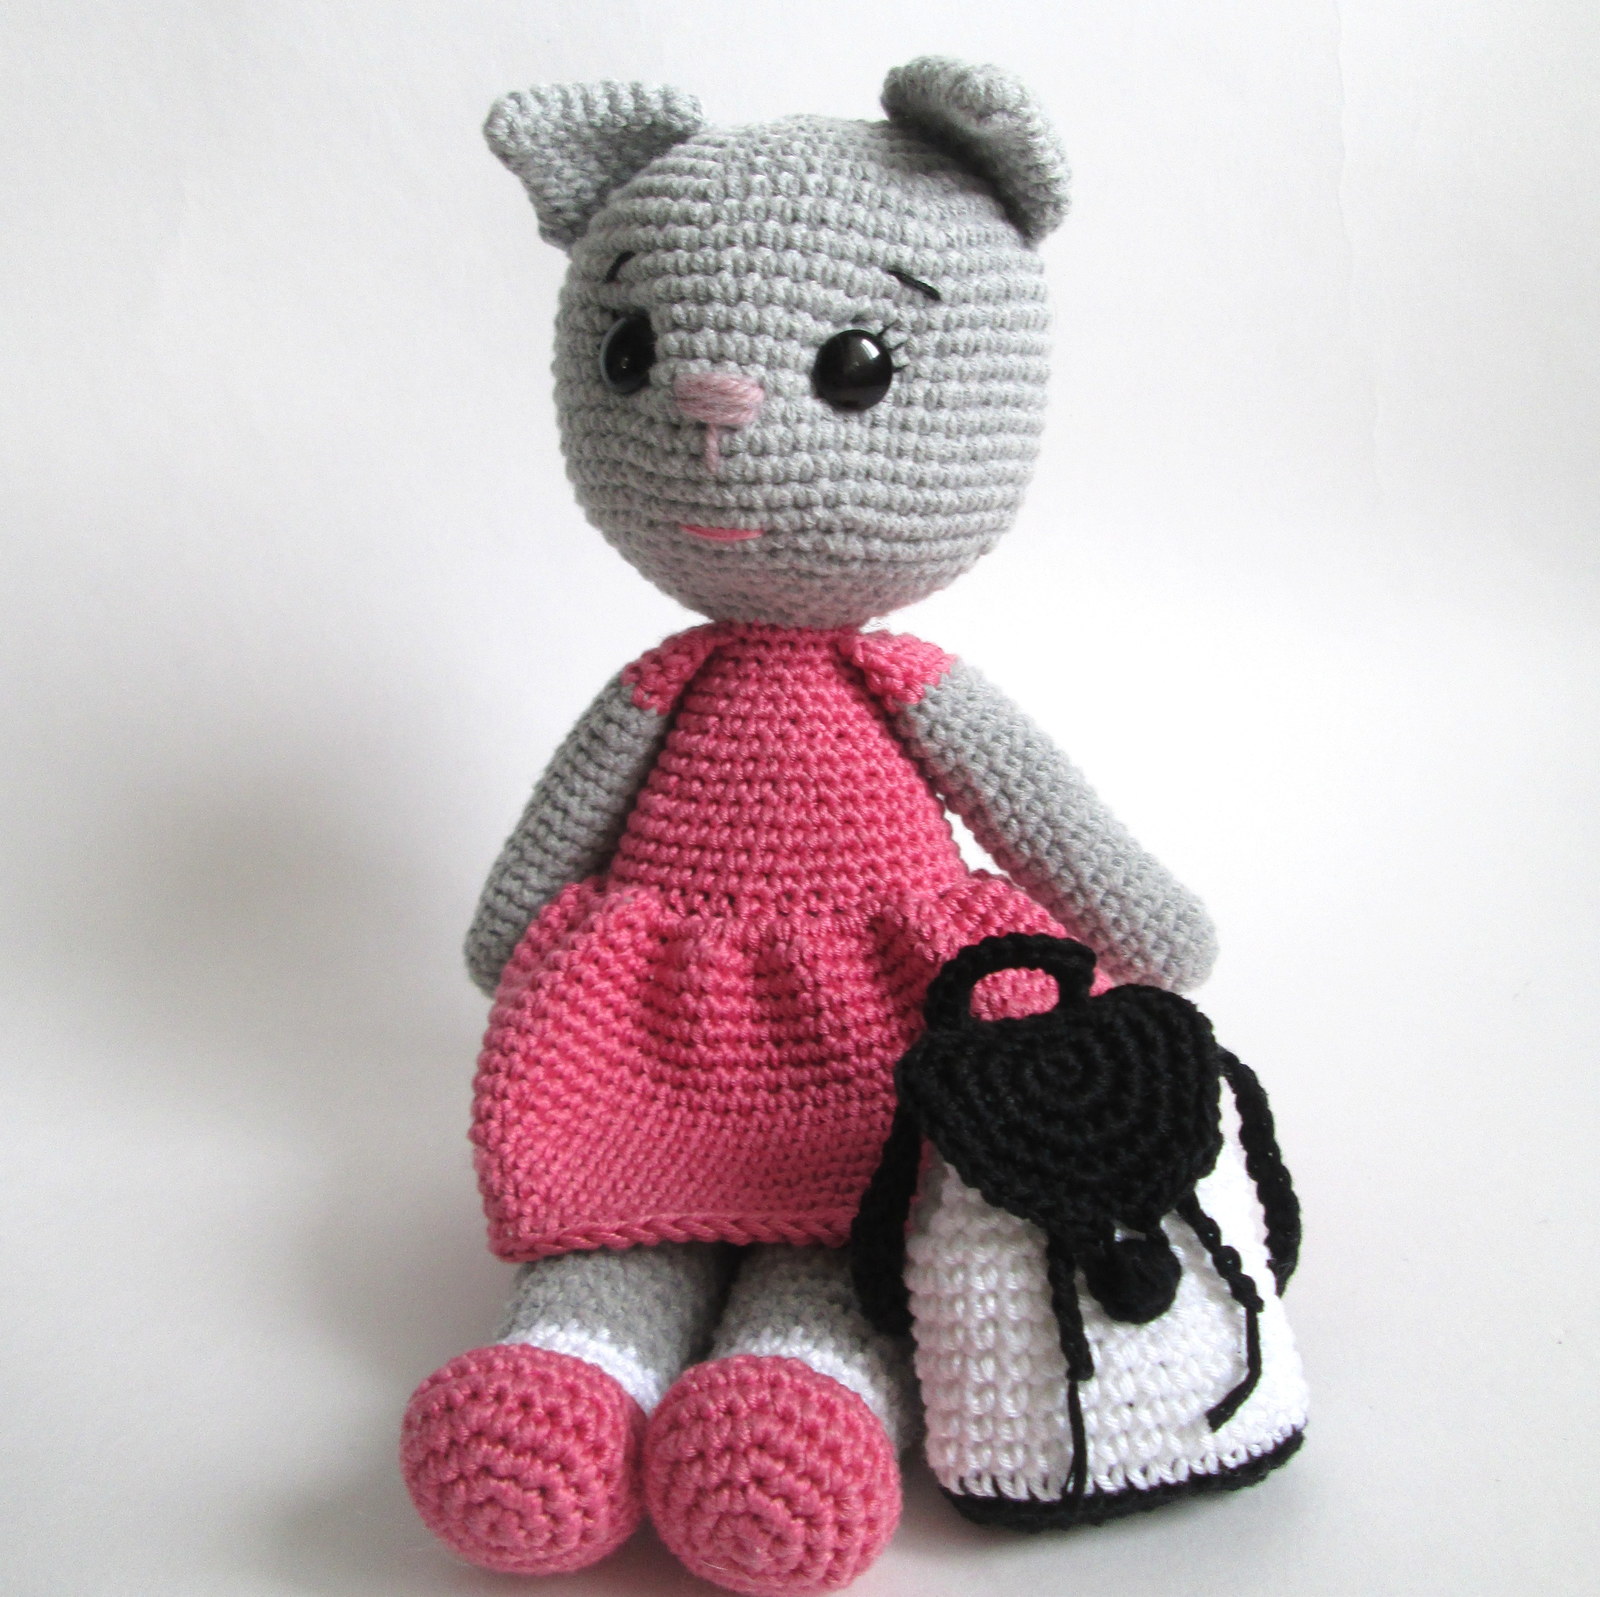 Knitted toys - My, Crochet, Knitted toys, Needlework without process, Amigurumi, Longpost